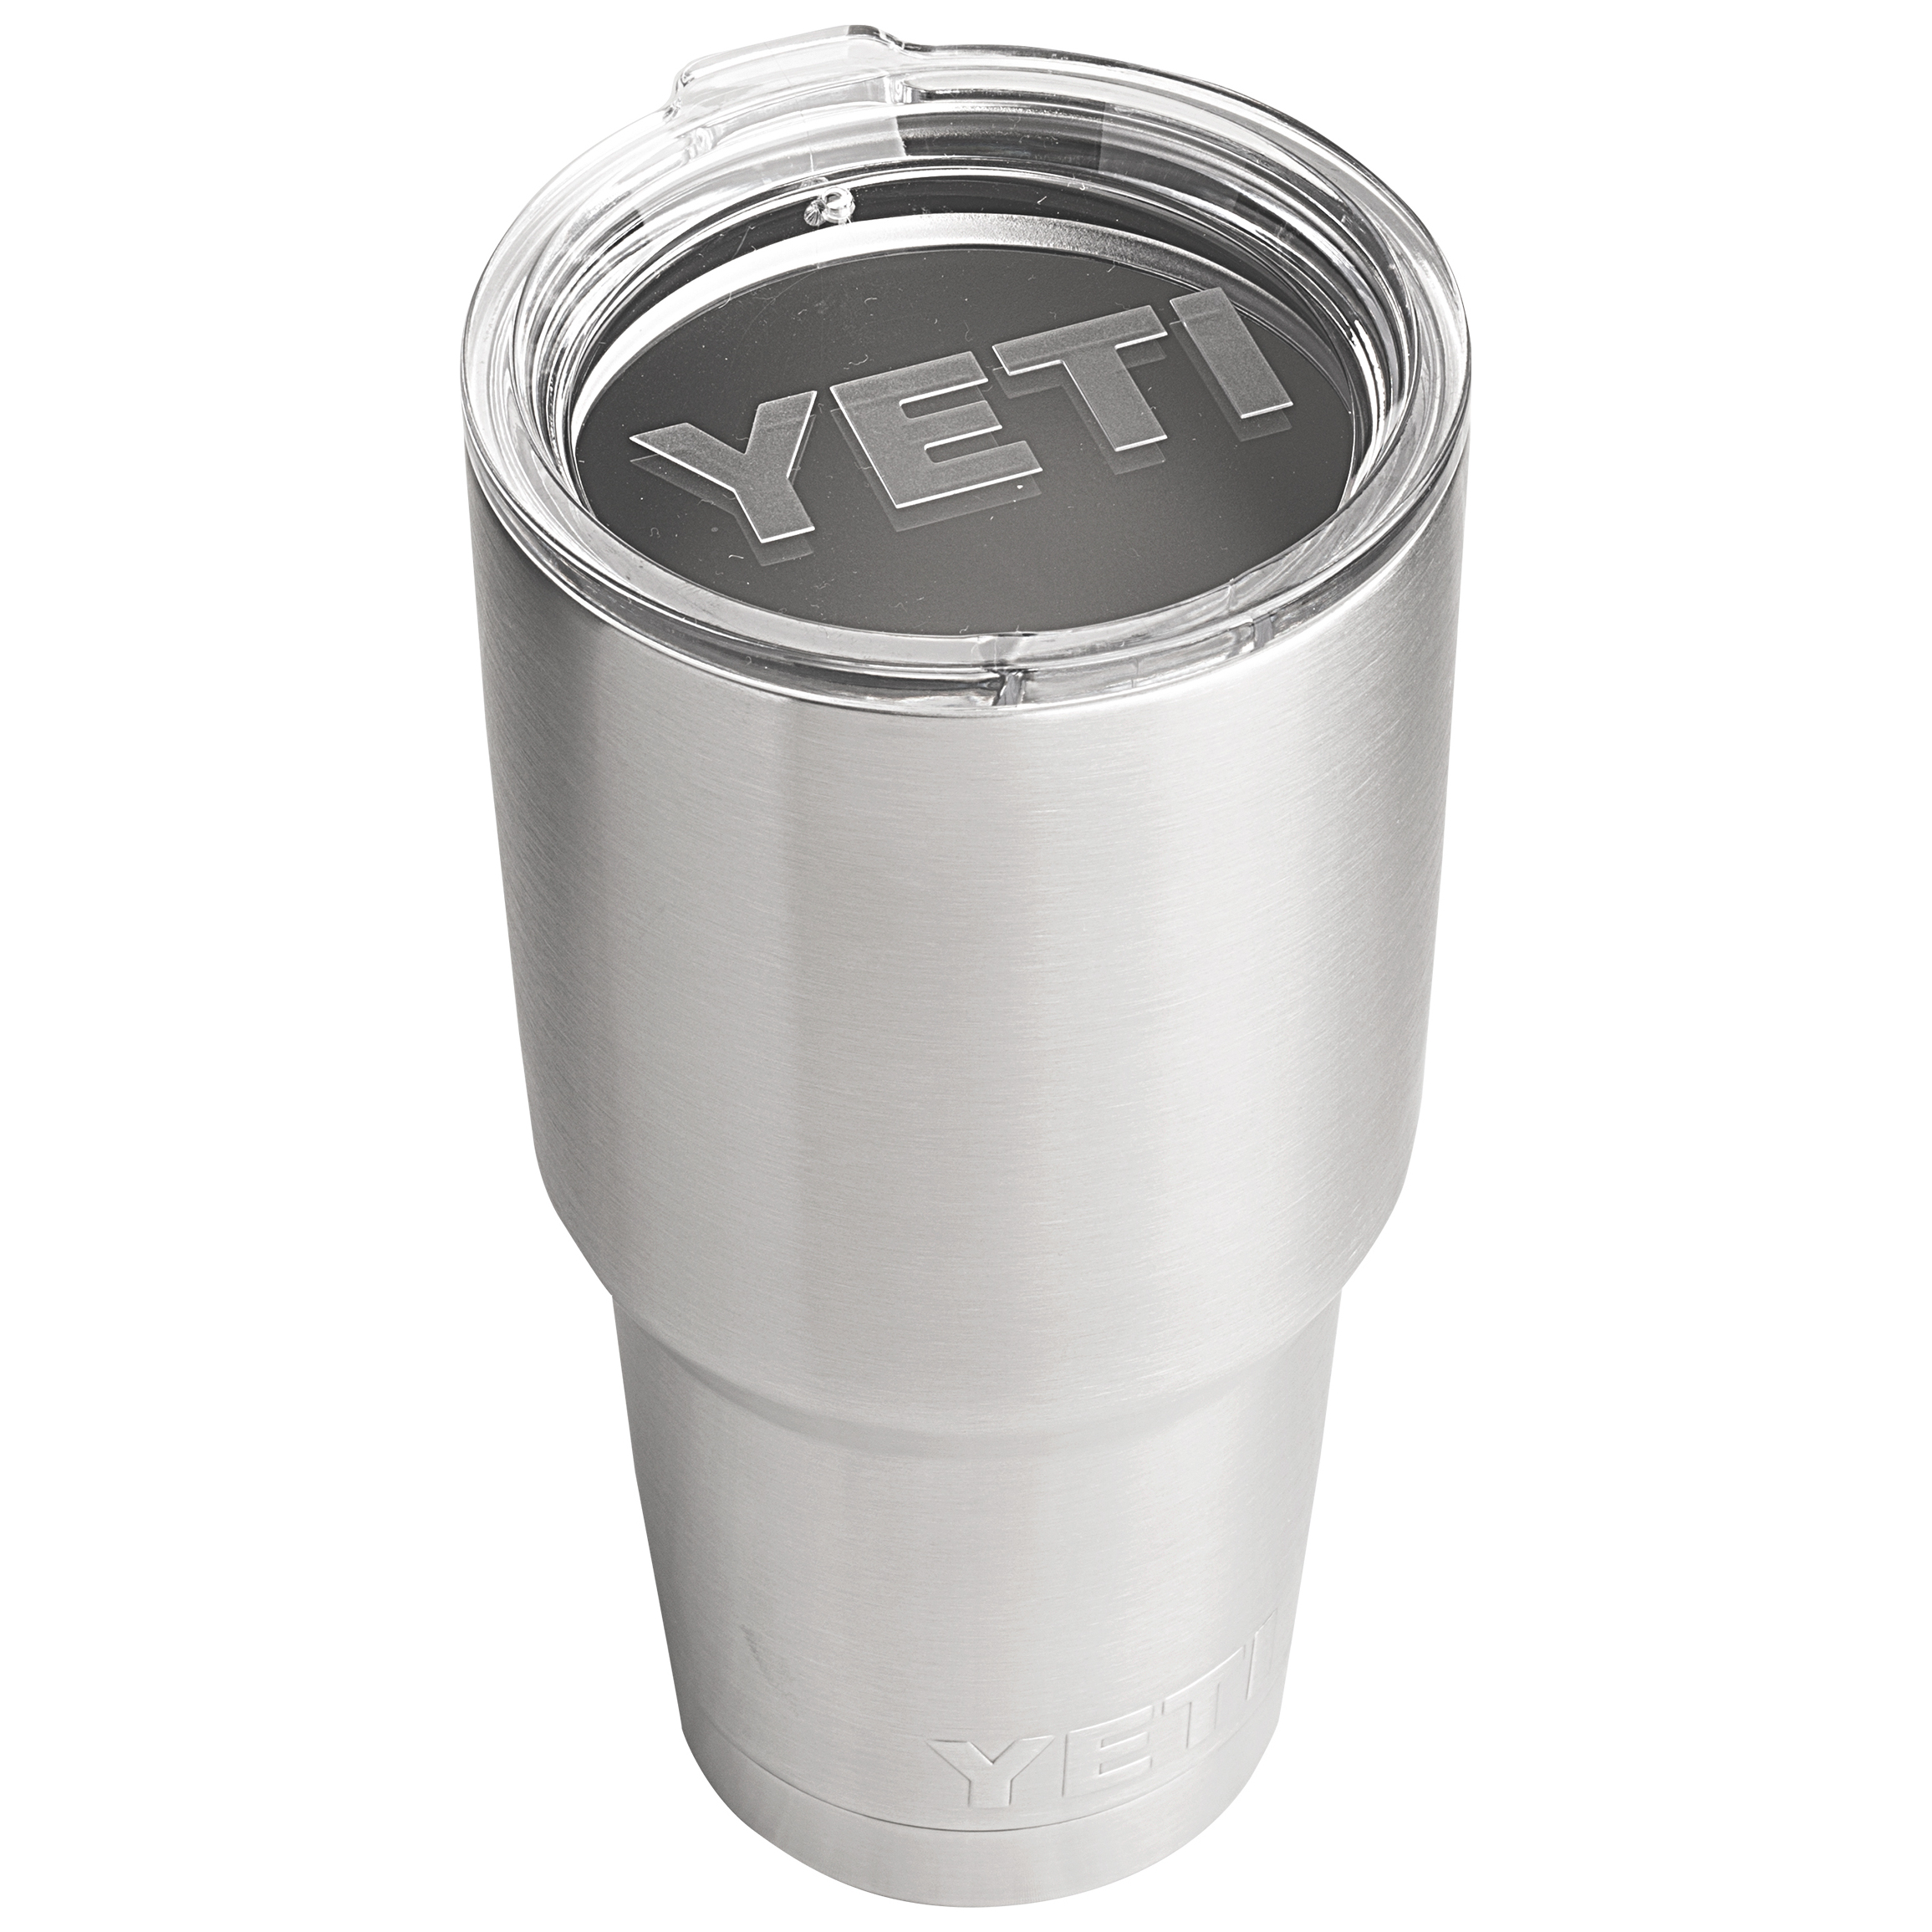 https://cdn11.bigcommerce.com/s-2vv8l4co0l/images/stencil/original/products/2242/10360/100475-yeti-coolers-rambler-tumbler-30-stainless-01__76074.1595348581.jpg